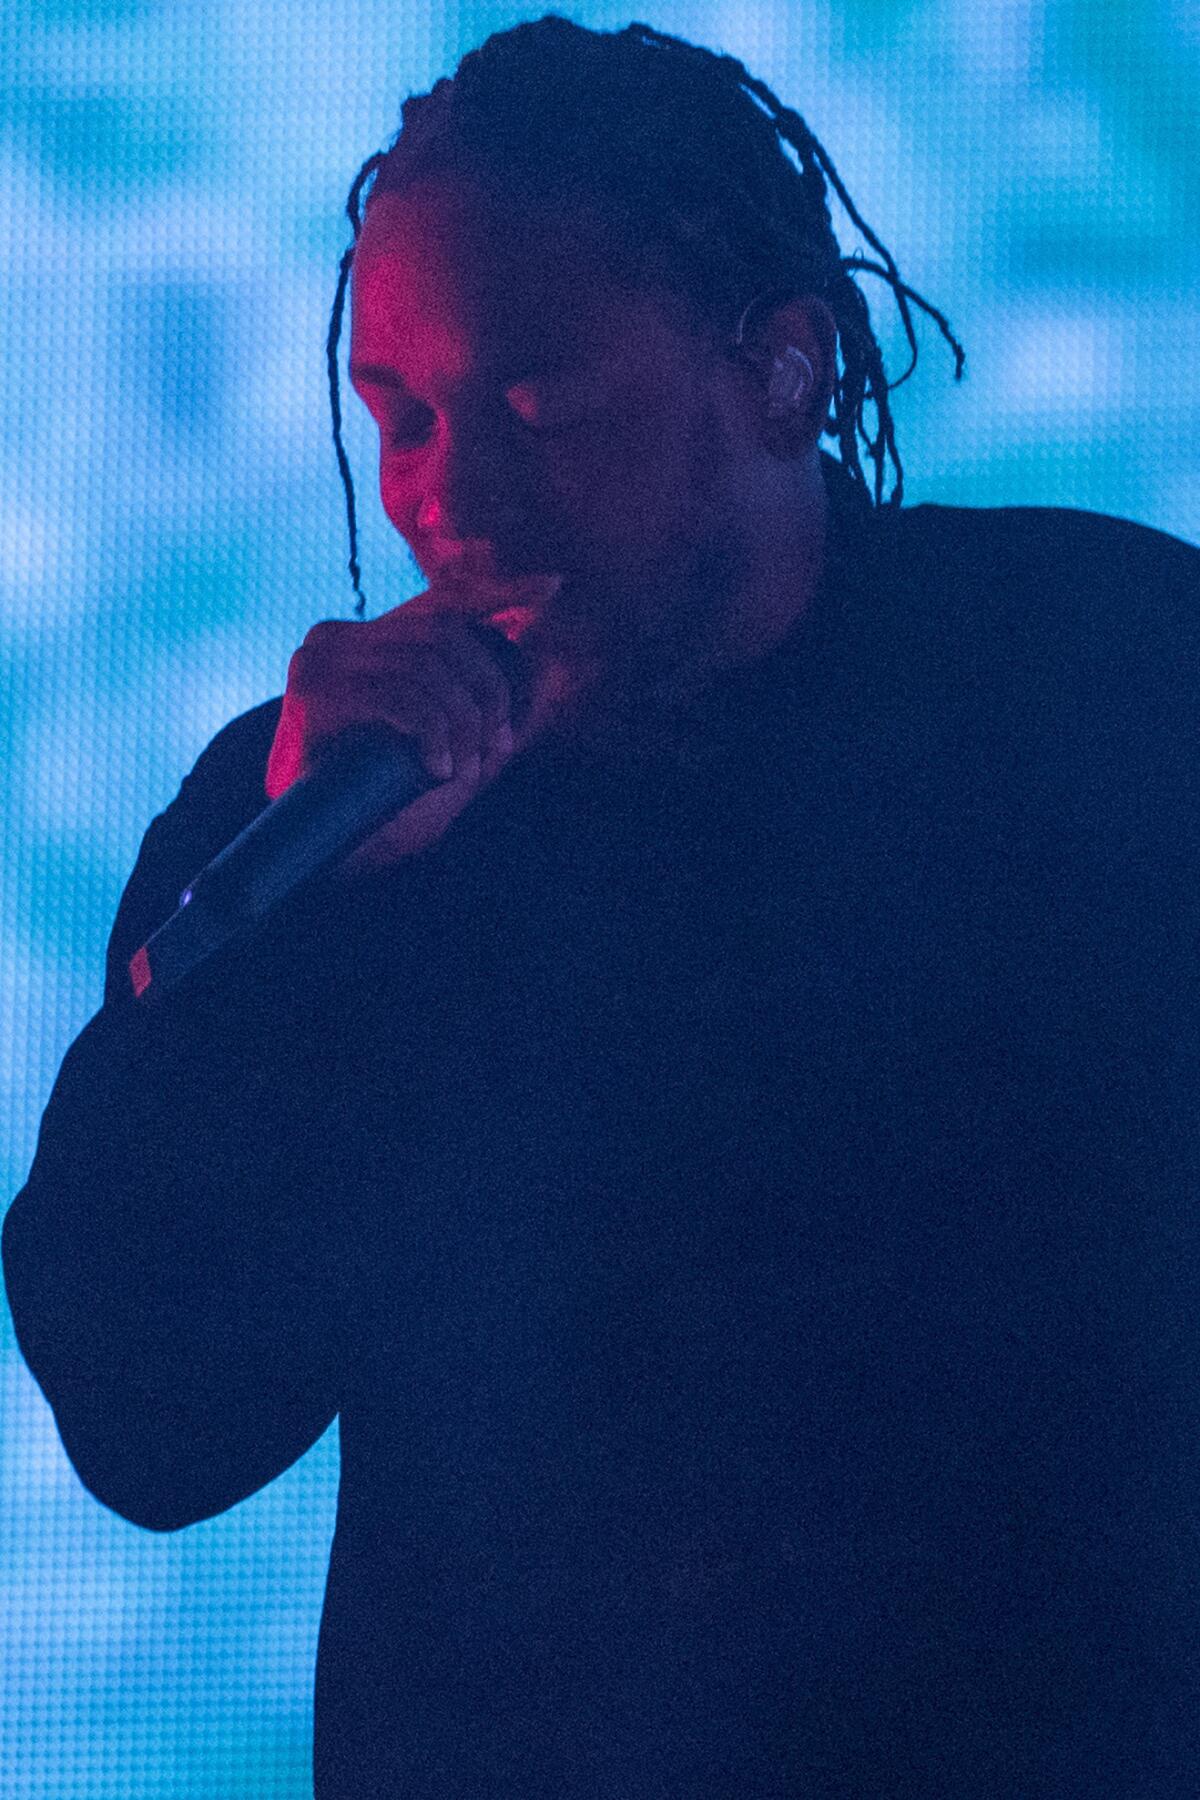 Kendrick Lamar performs at the Coachella Valley Music and Arts Festival.